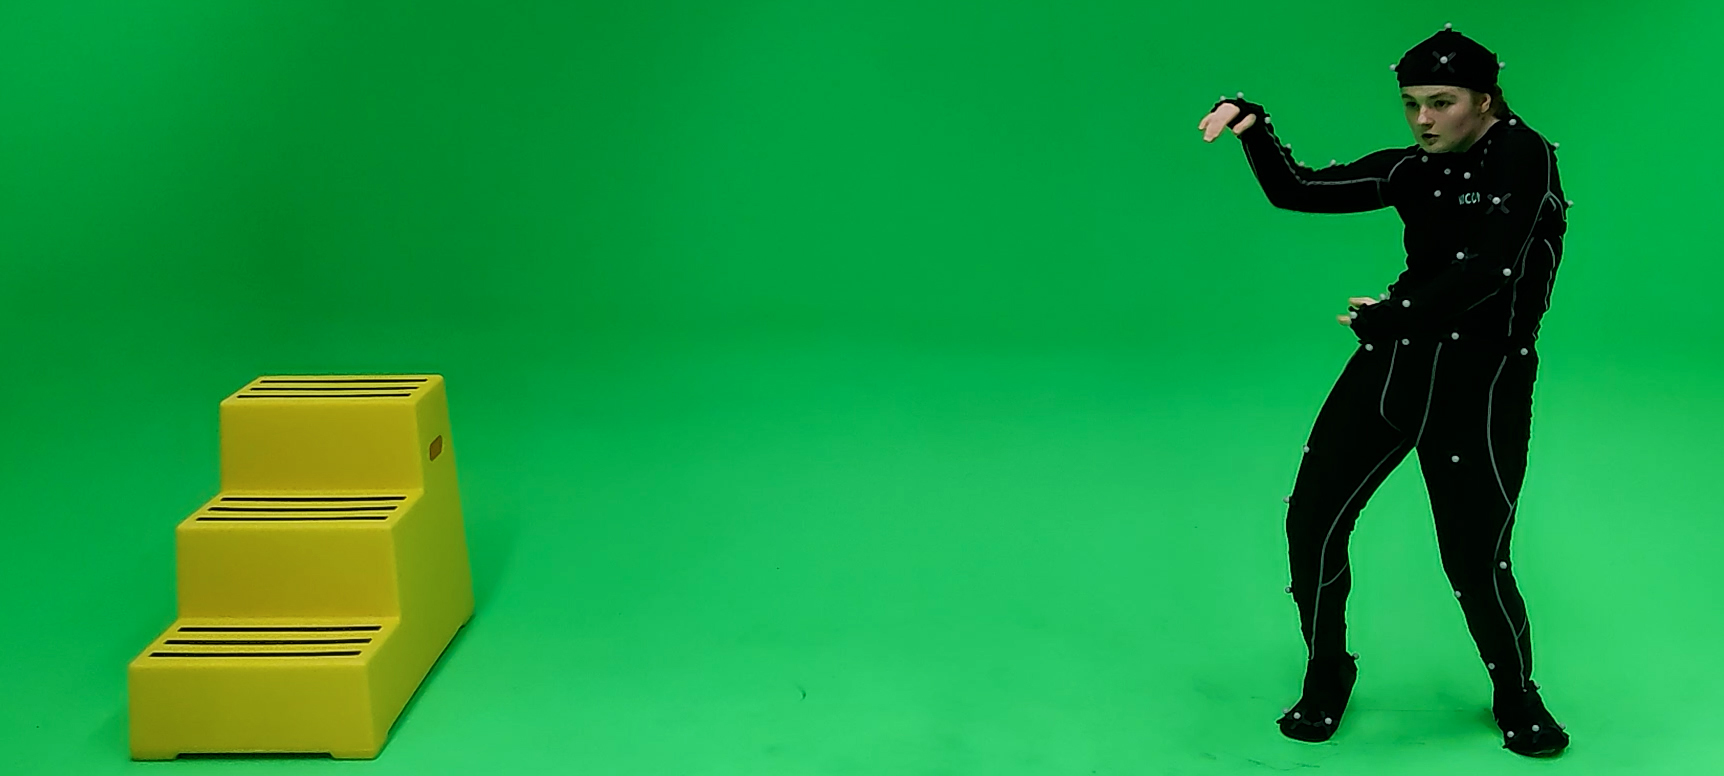 Green screen with figure in VR suit.